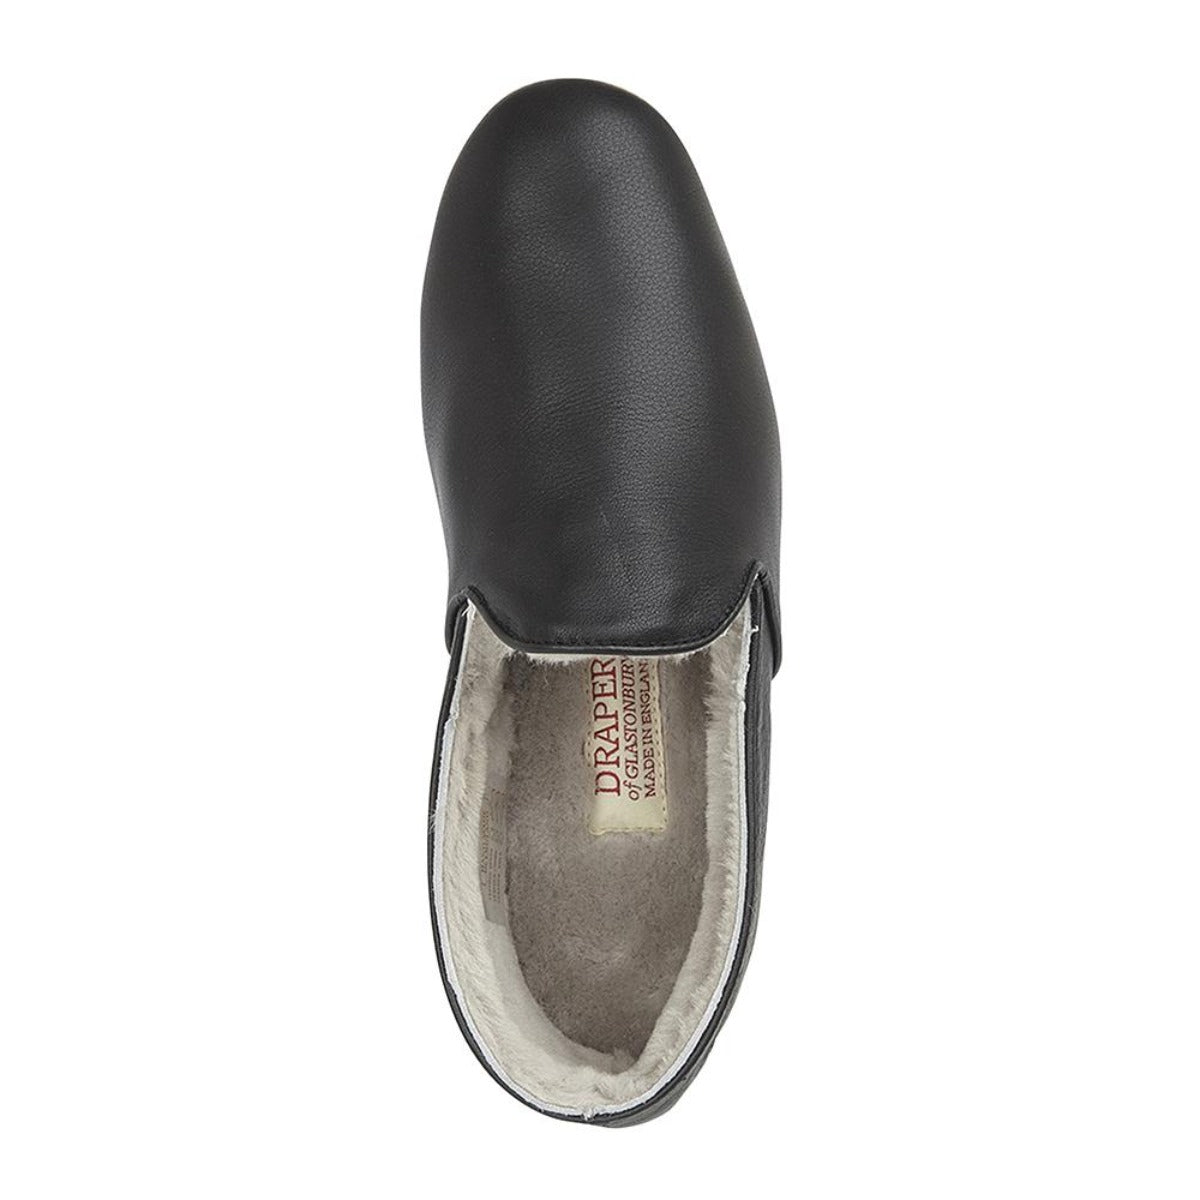 Leather and suede slippers with sheepskin lining in black from slipper experts Draper, featuring rubber-enforced sole for both indoor and outdoor use. 